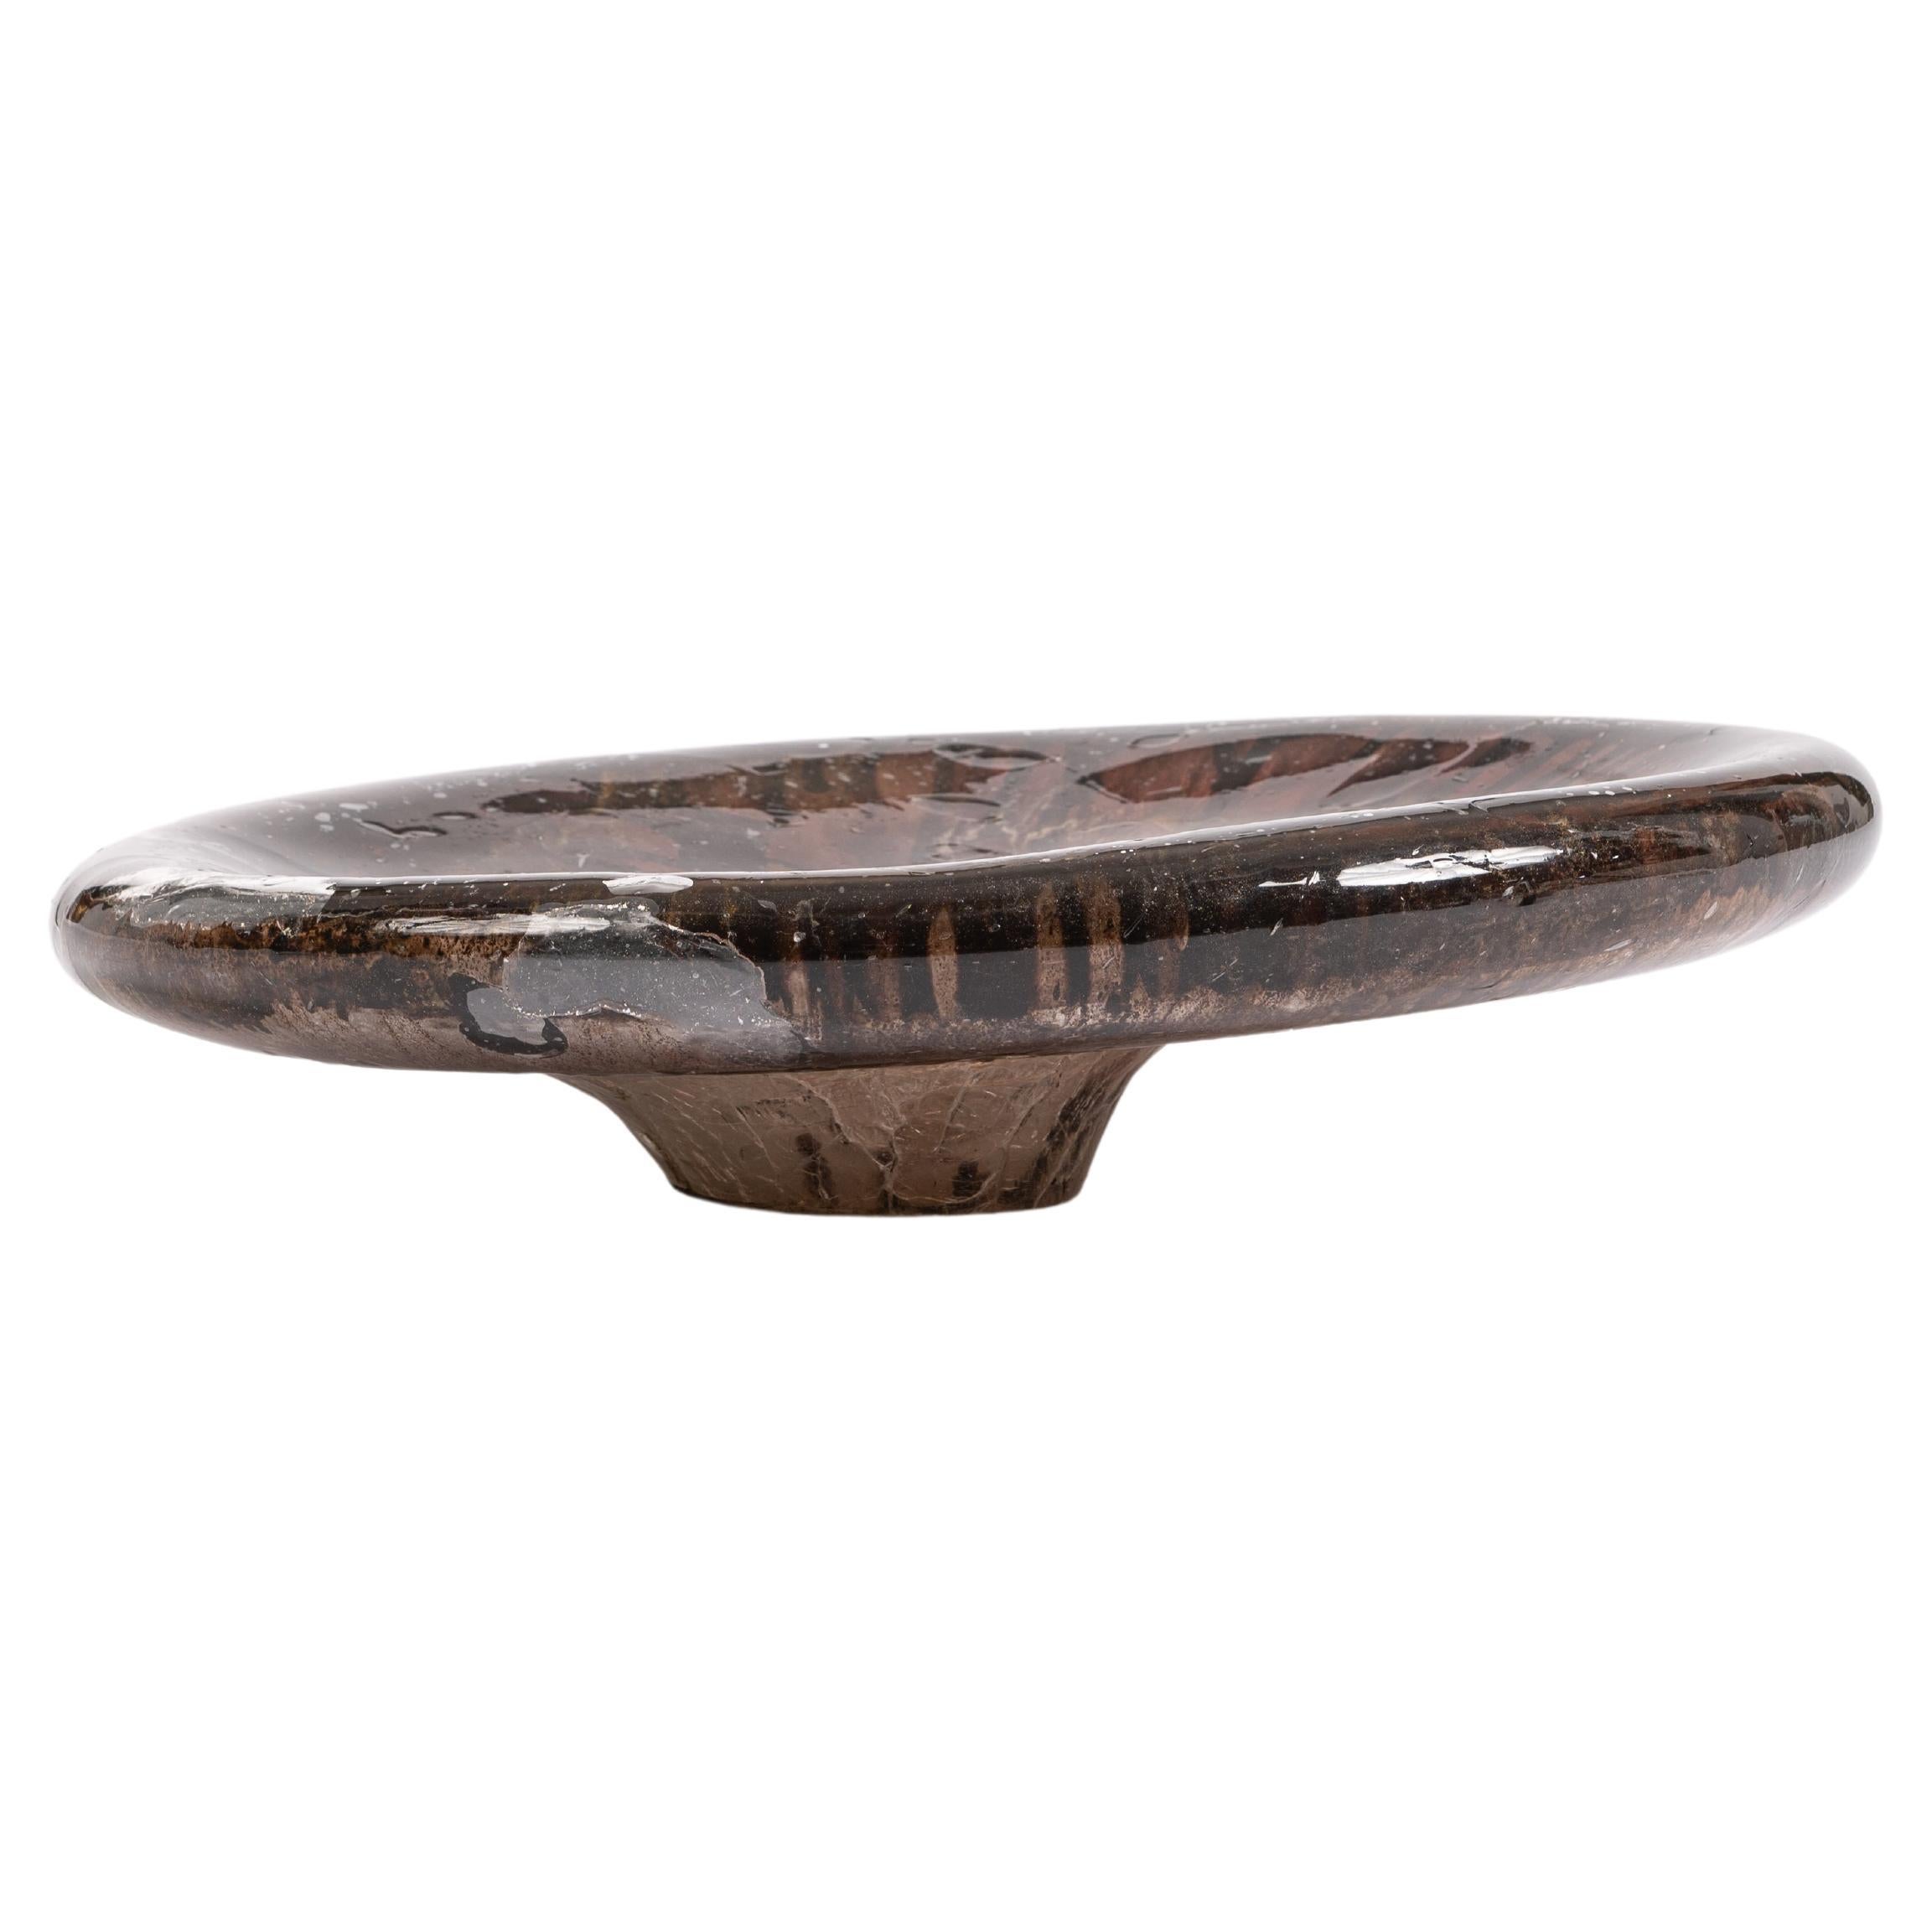 Italian mid-century resin bowl in brown-gold tones Florenze 1980s

An artistic object that lies there like a flower, quite naturally it spreads its beauty.
The slightly oval shape with a wide rim stands on an off-center base.
The bowl on the base